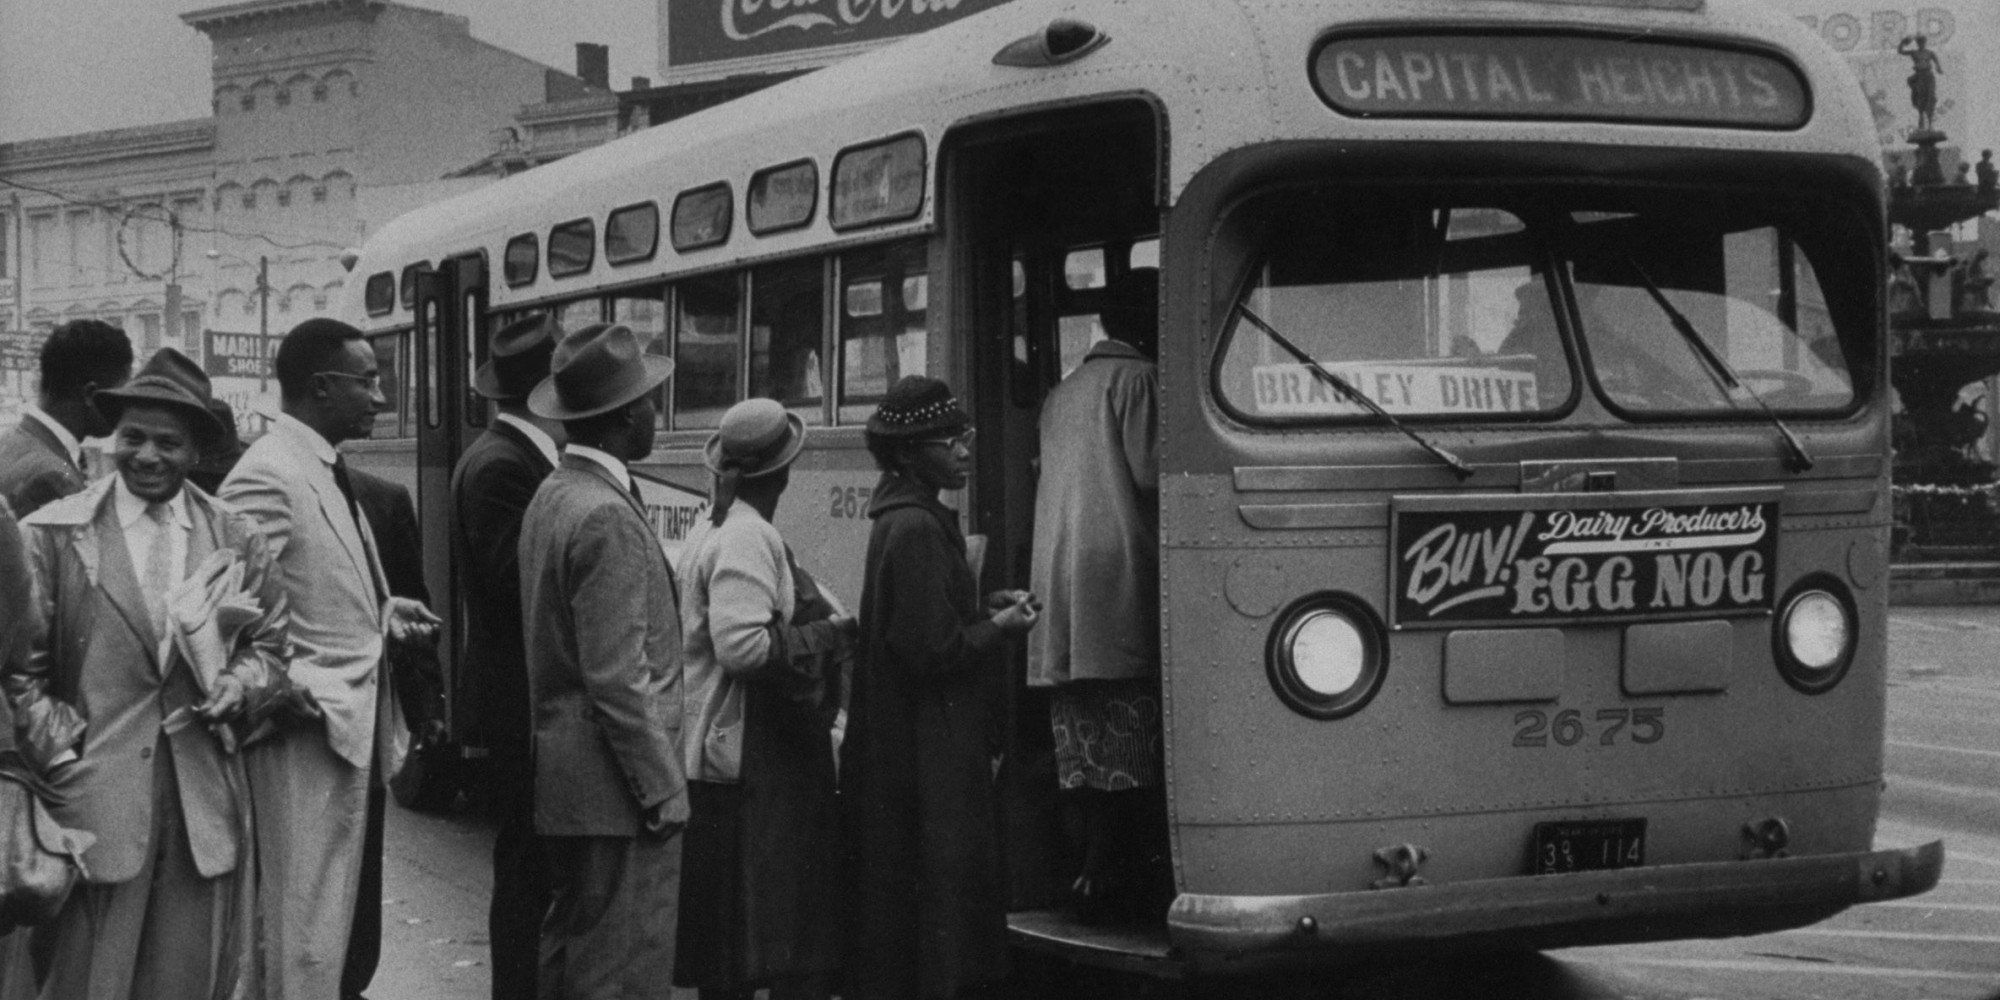 Several Black riders wait to board a bus to Capitol Heights